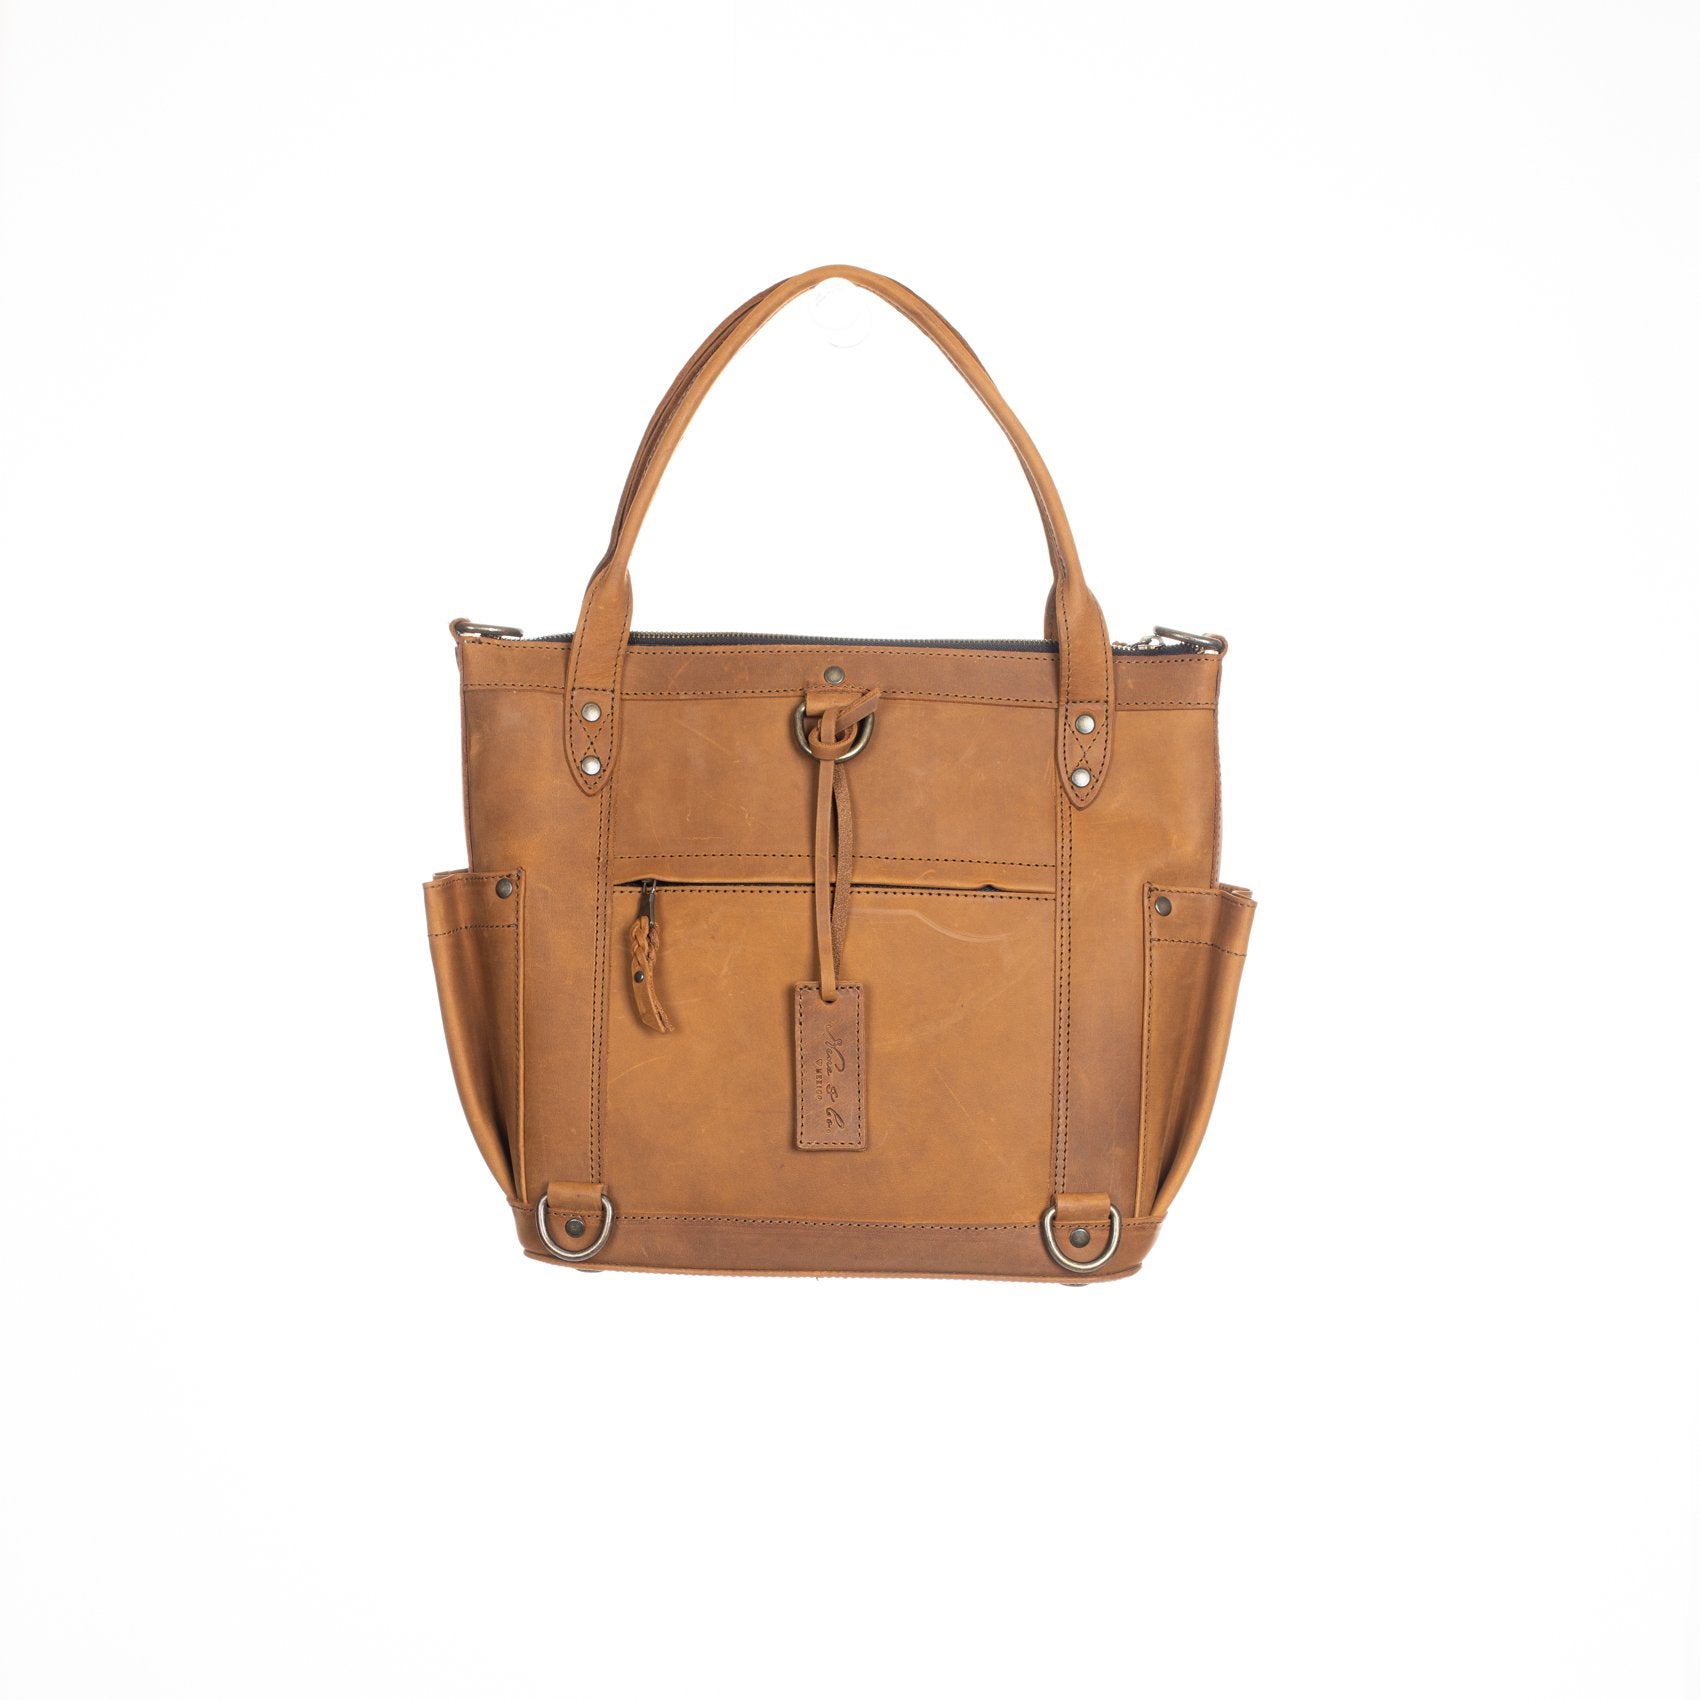 THE PERFECT BAG MEDIUM - MEXICO COLLECTION - HANDWOVEN FRONT NO. 95930 - TOBACCO LEATHER